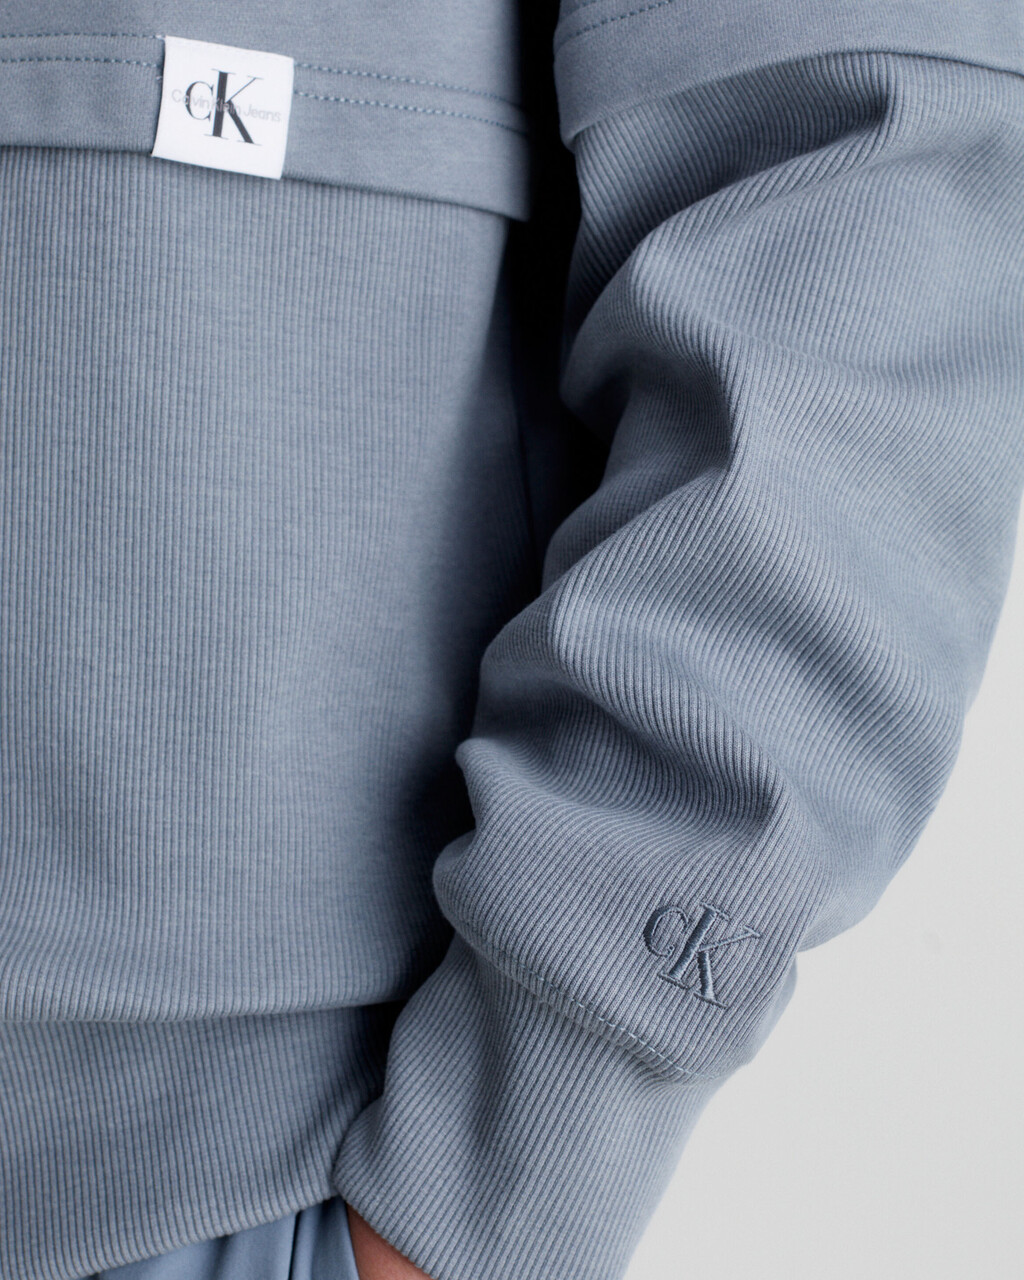 Relaxed Material Mix Sweatshirt, Overcast Grey, hi-res